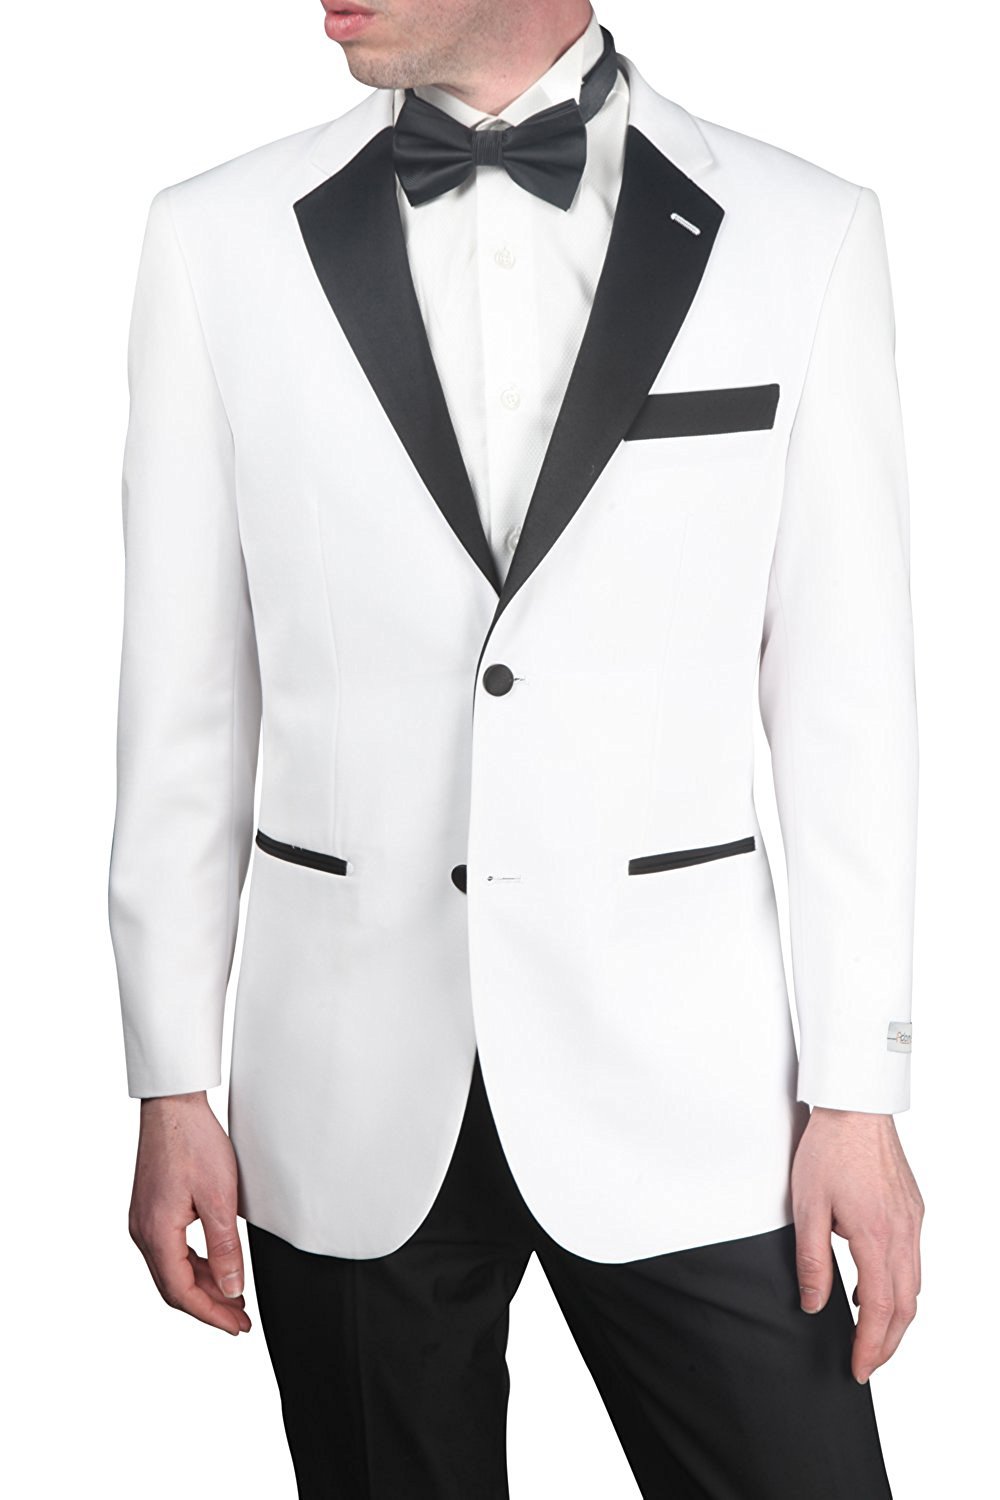 Men's Classic & Slim Fit Two-Piece Notch Lapel Formal Tuxedo Suit - Available in Many Sizes & Colors